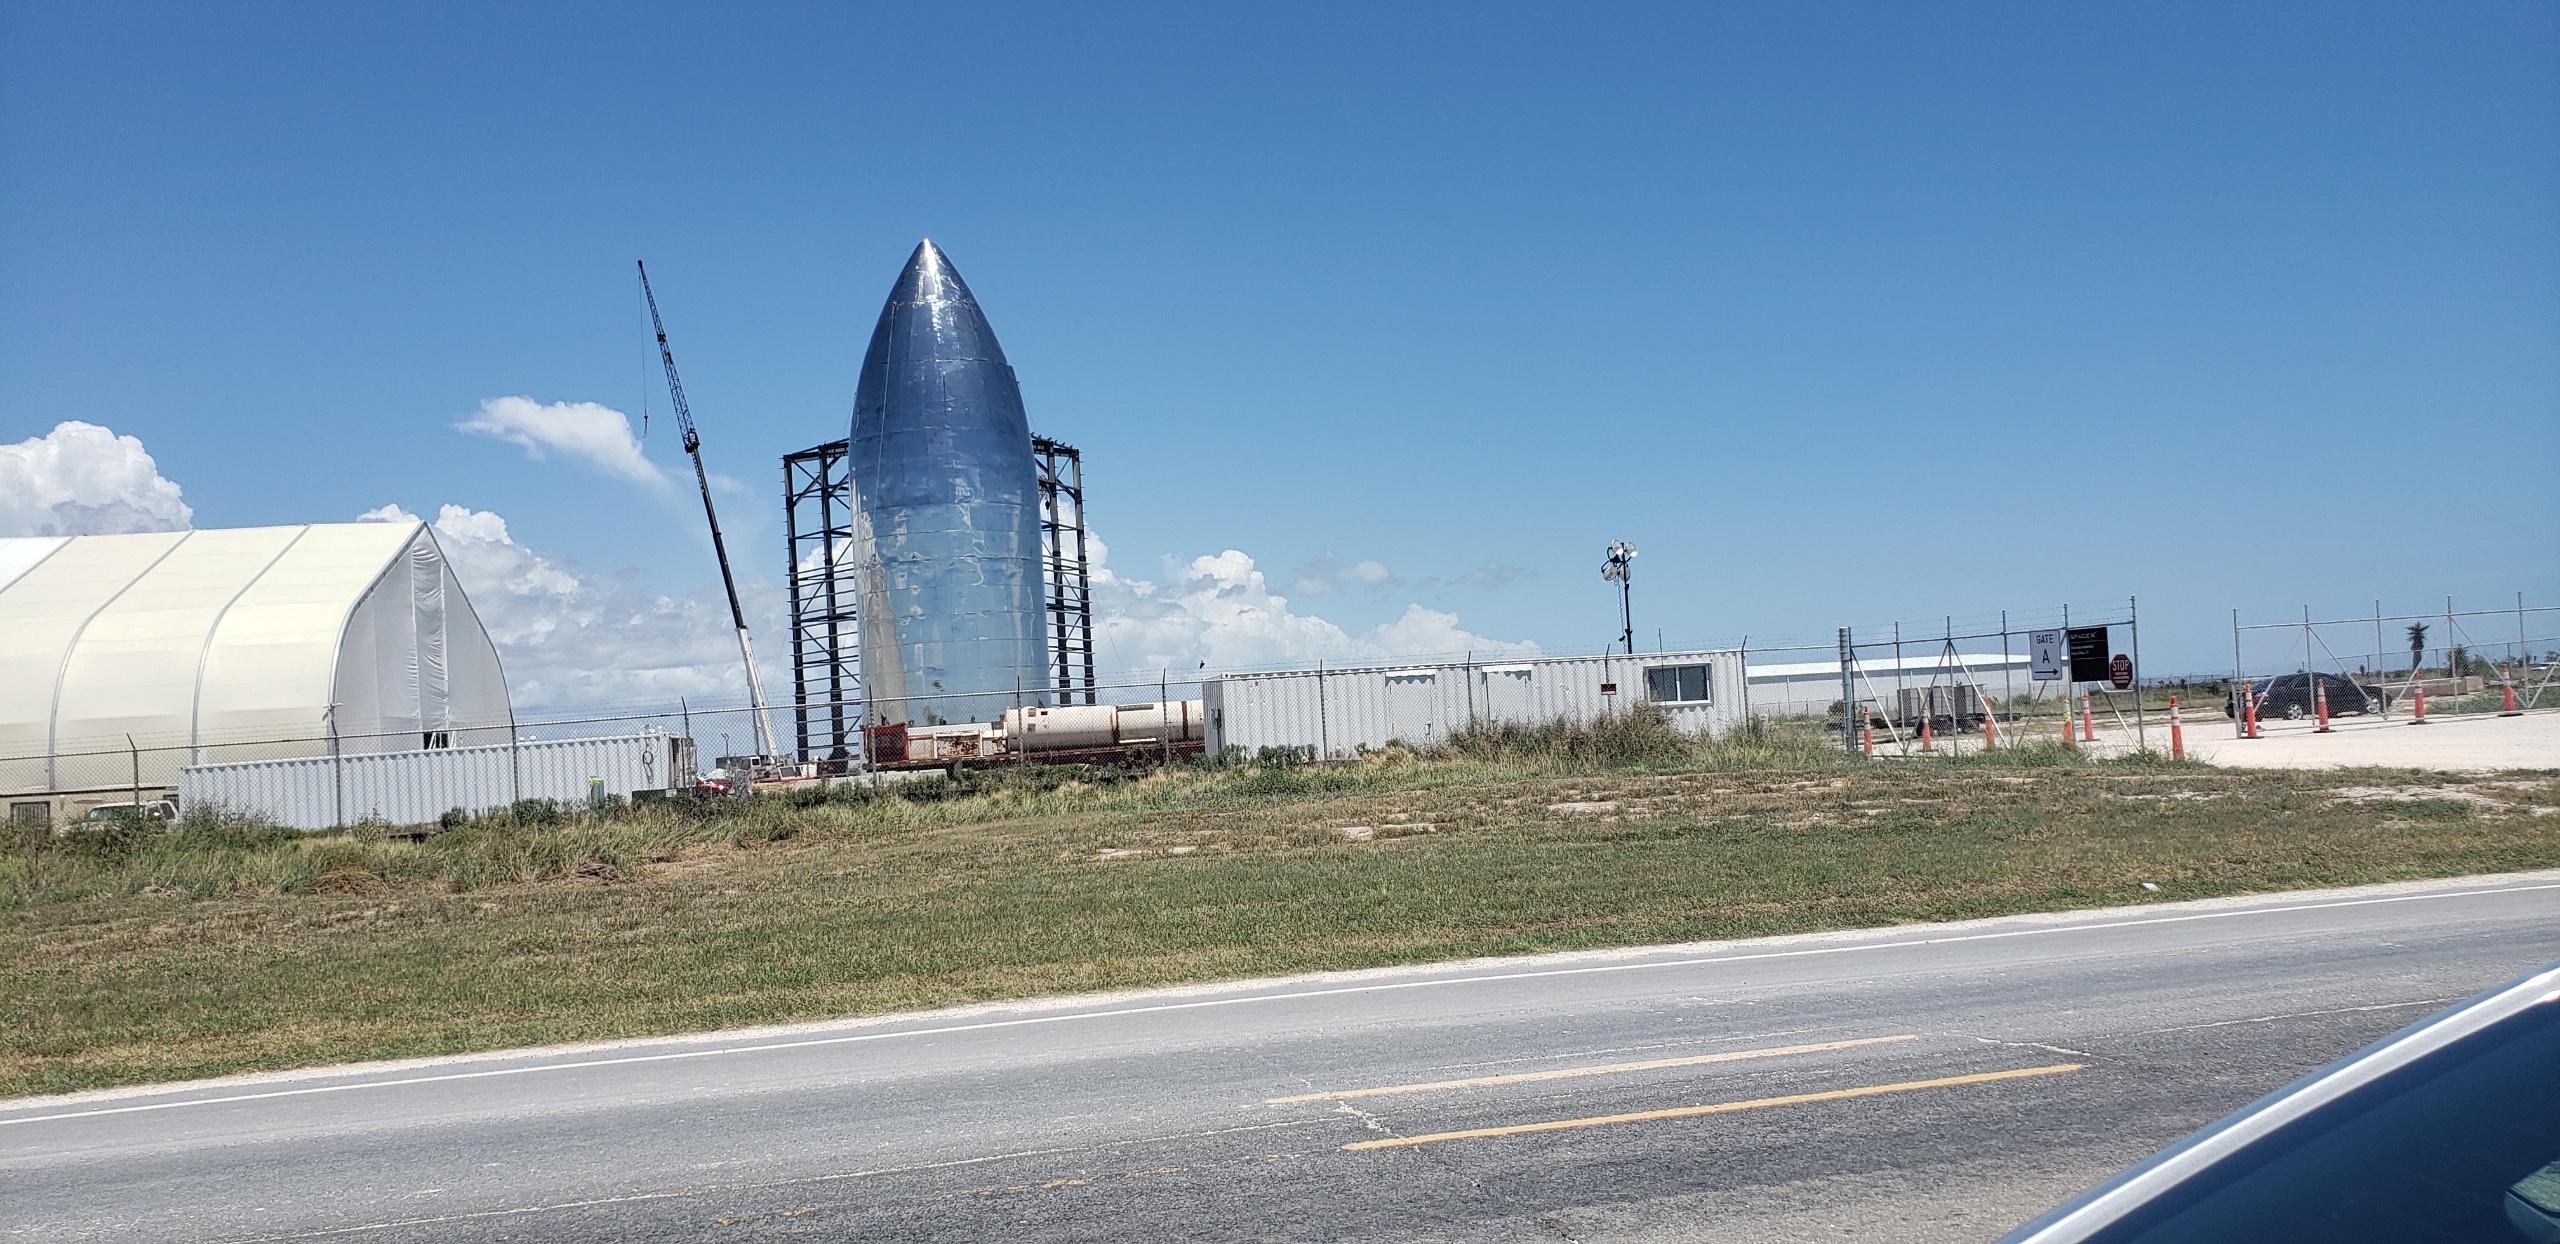 Existing SpaceX facilities constructed along State Highway 4 at the Gulf of Mexico within the Palmito Ranch Battlefield National Historic Landmark site. Photo: Melissa Currie, August 2019.